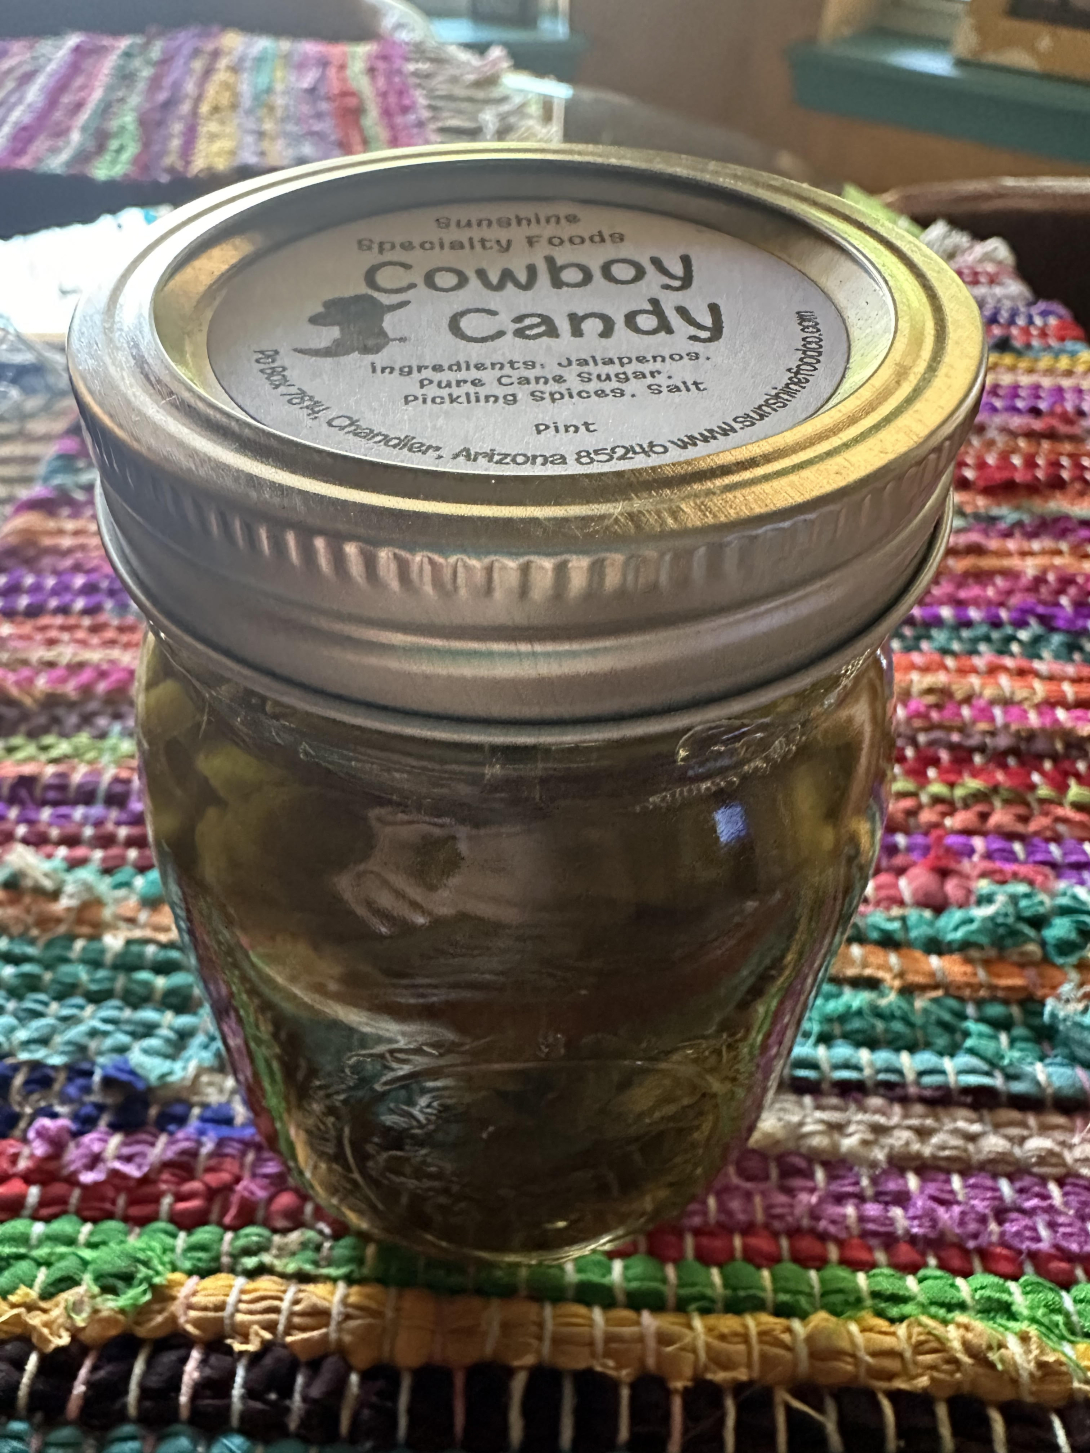 Sweet & Spice Candied Jalapenos